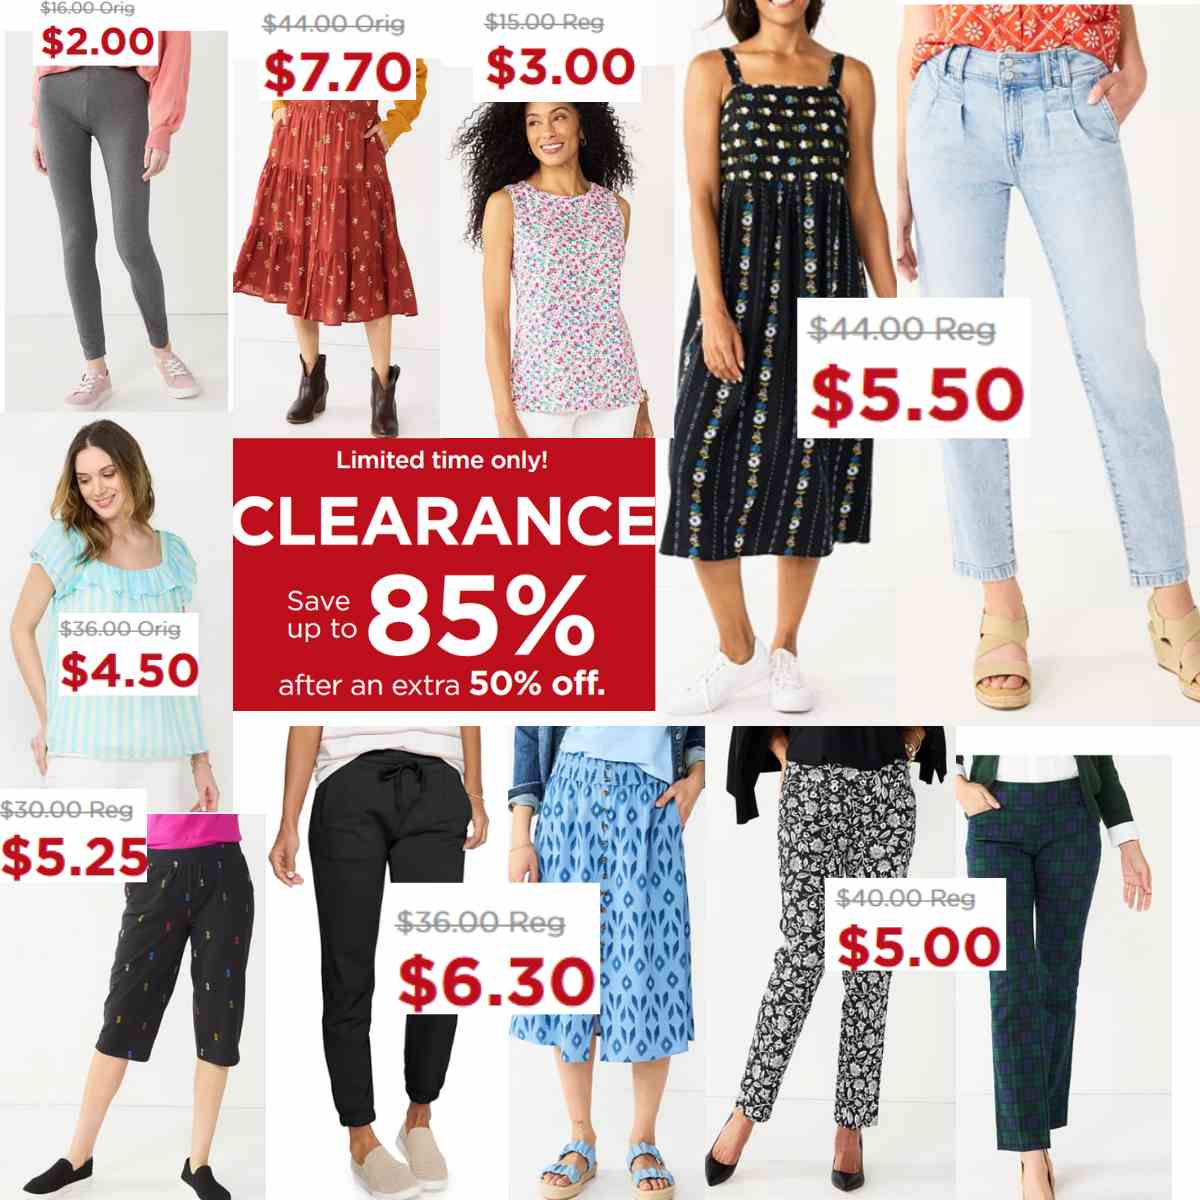 Save up to 85% on women's clearance apparel at Kohl's | Smart Savers